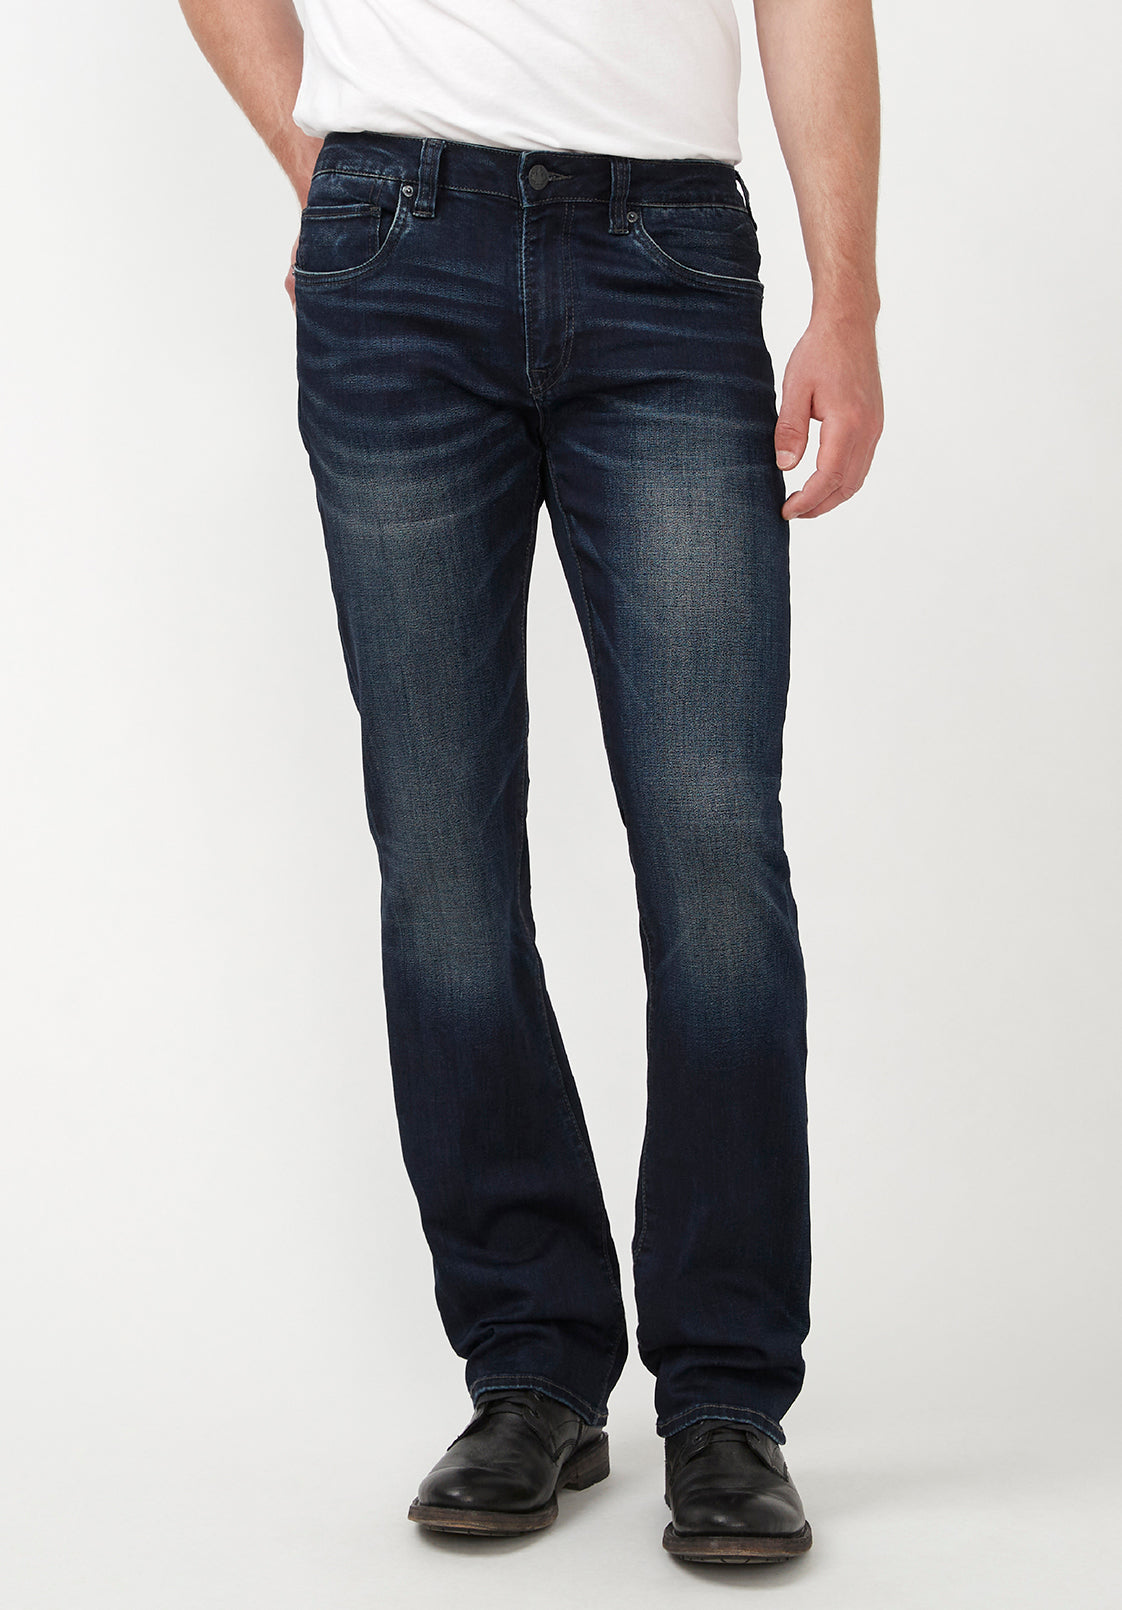 Slim Bootcut King Men's Jeans in Whiskered and Sanded Dark Blue